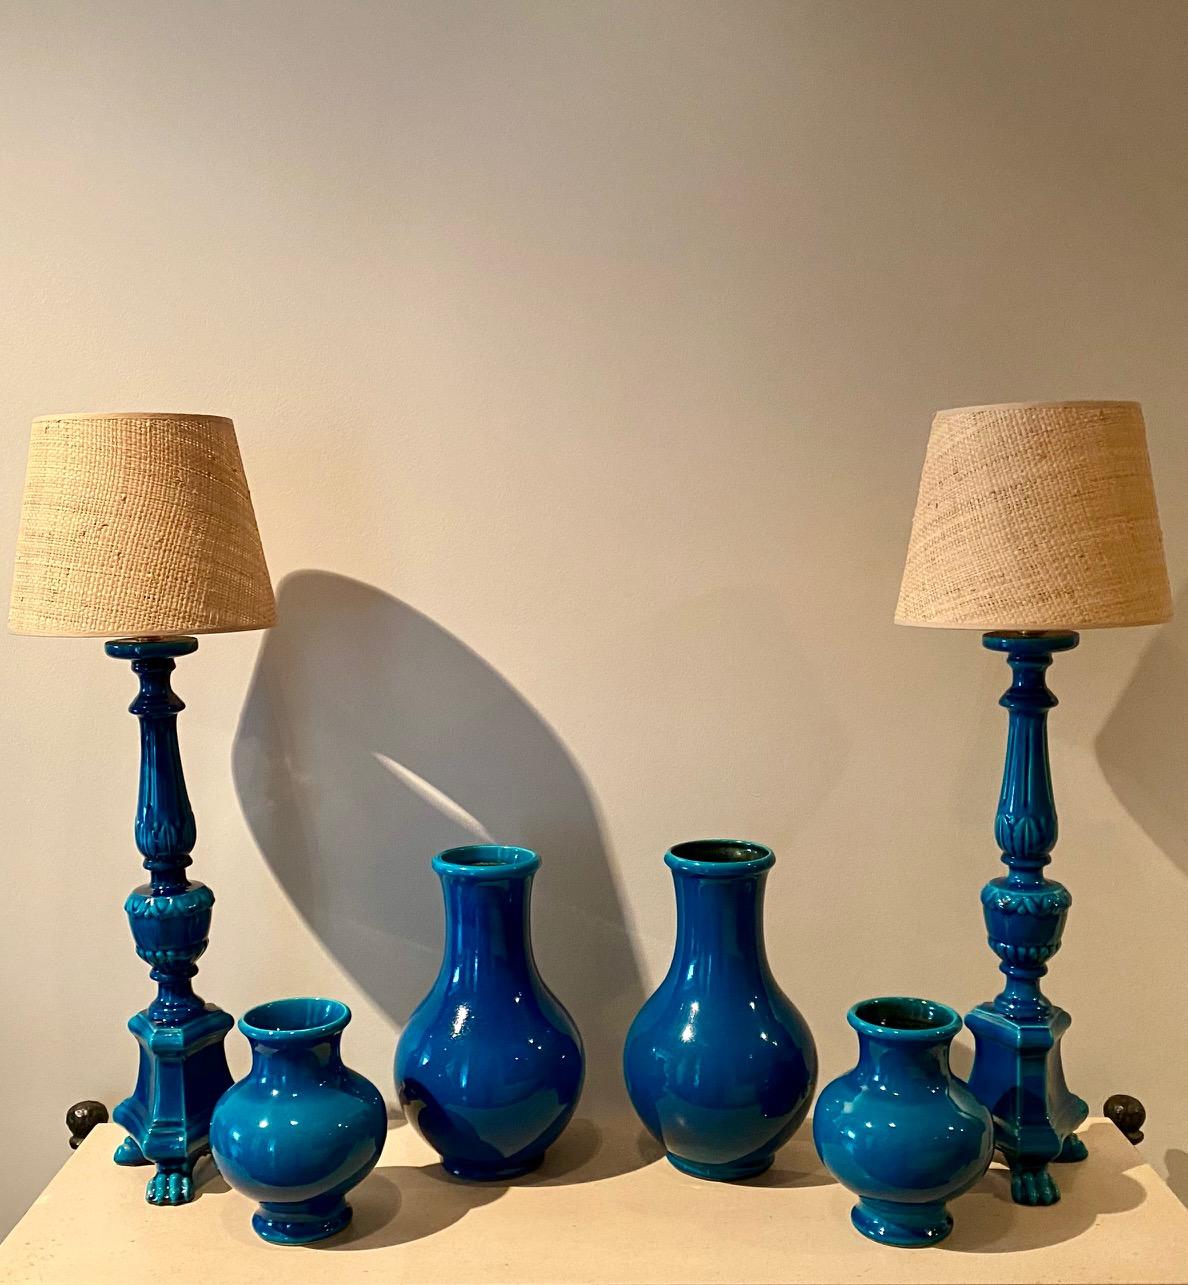 Pol Chambost 1970's Pair of Blue Ceramic lamps 2